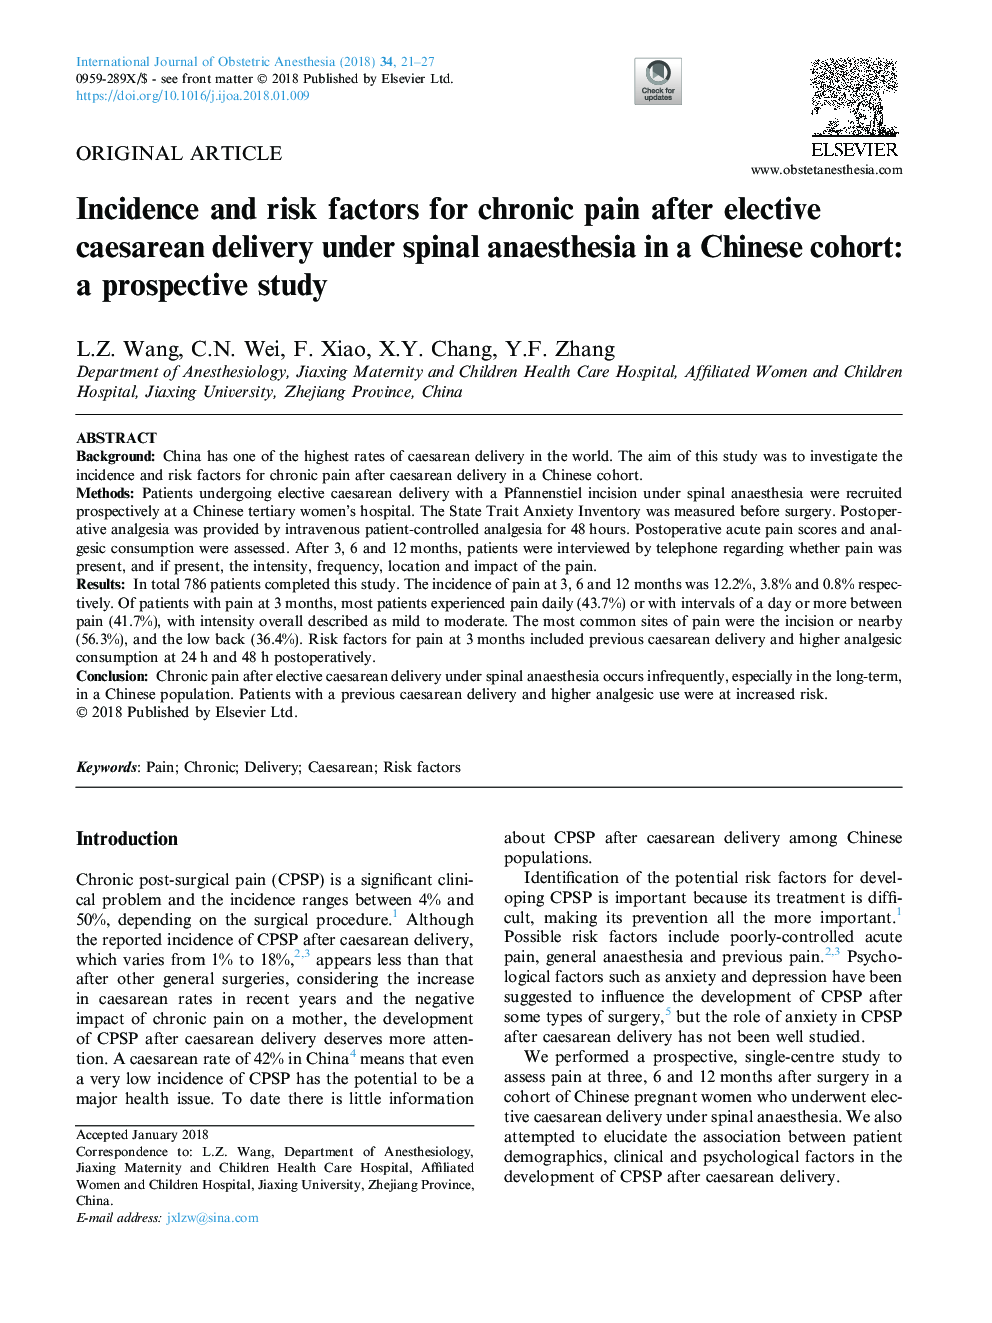 Incidence and risk factors for chronic pain after elective caesarean delivery under spinal anaesthesia in a Chinese cohort: a prospective study